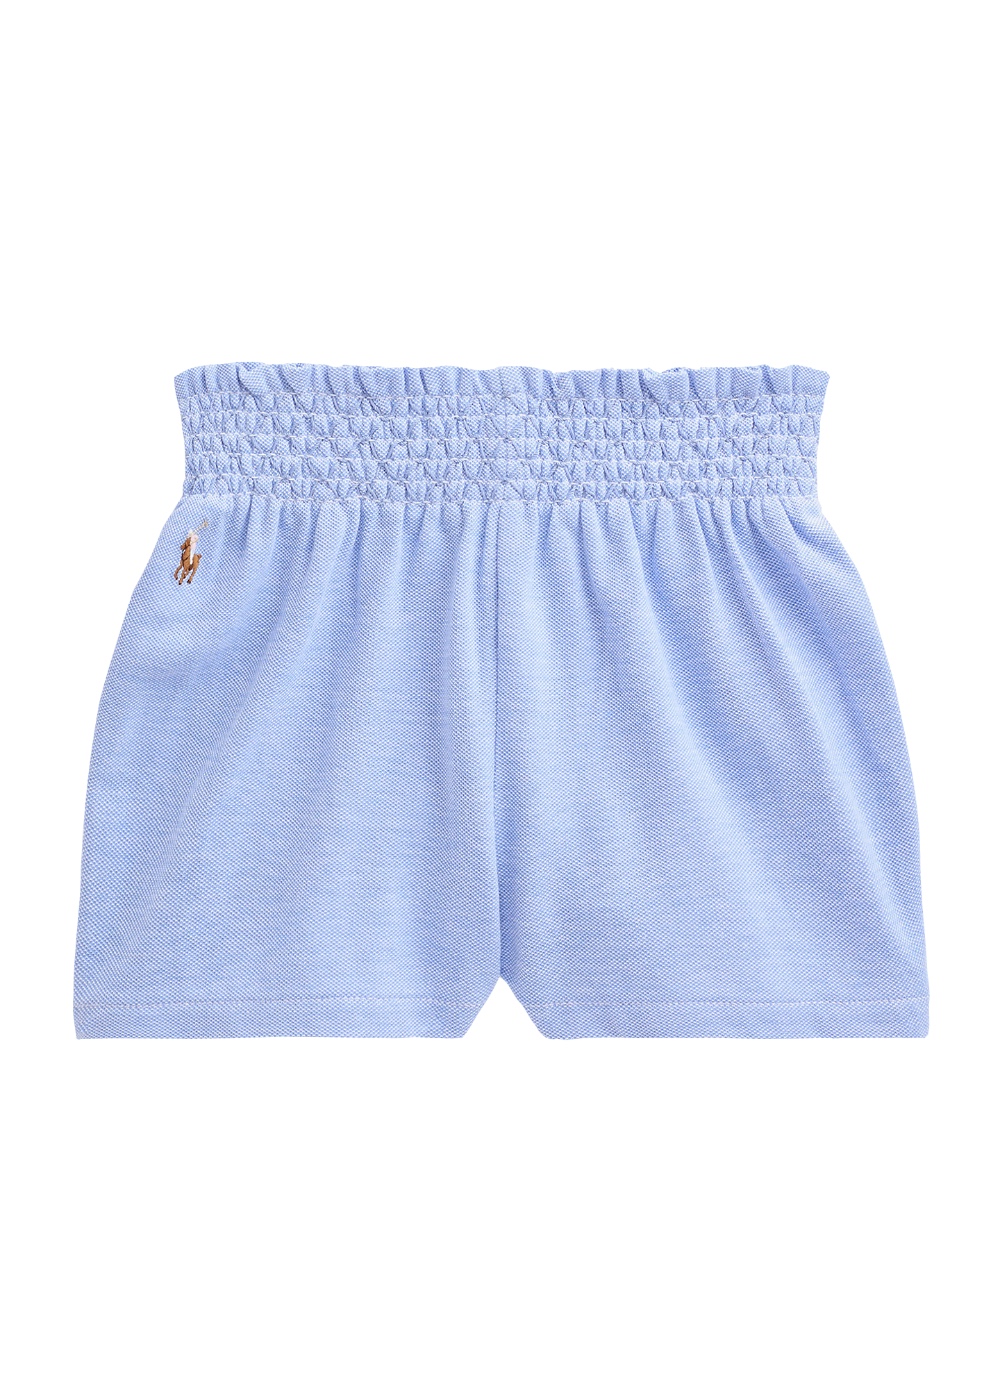 Featured image for “POLO RALPH LAUREN SHORT IN OXFORD”